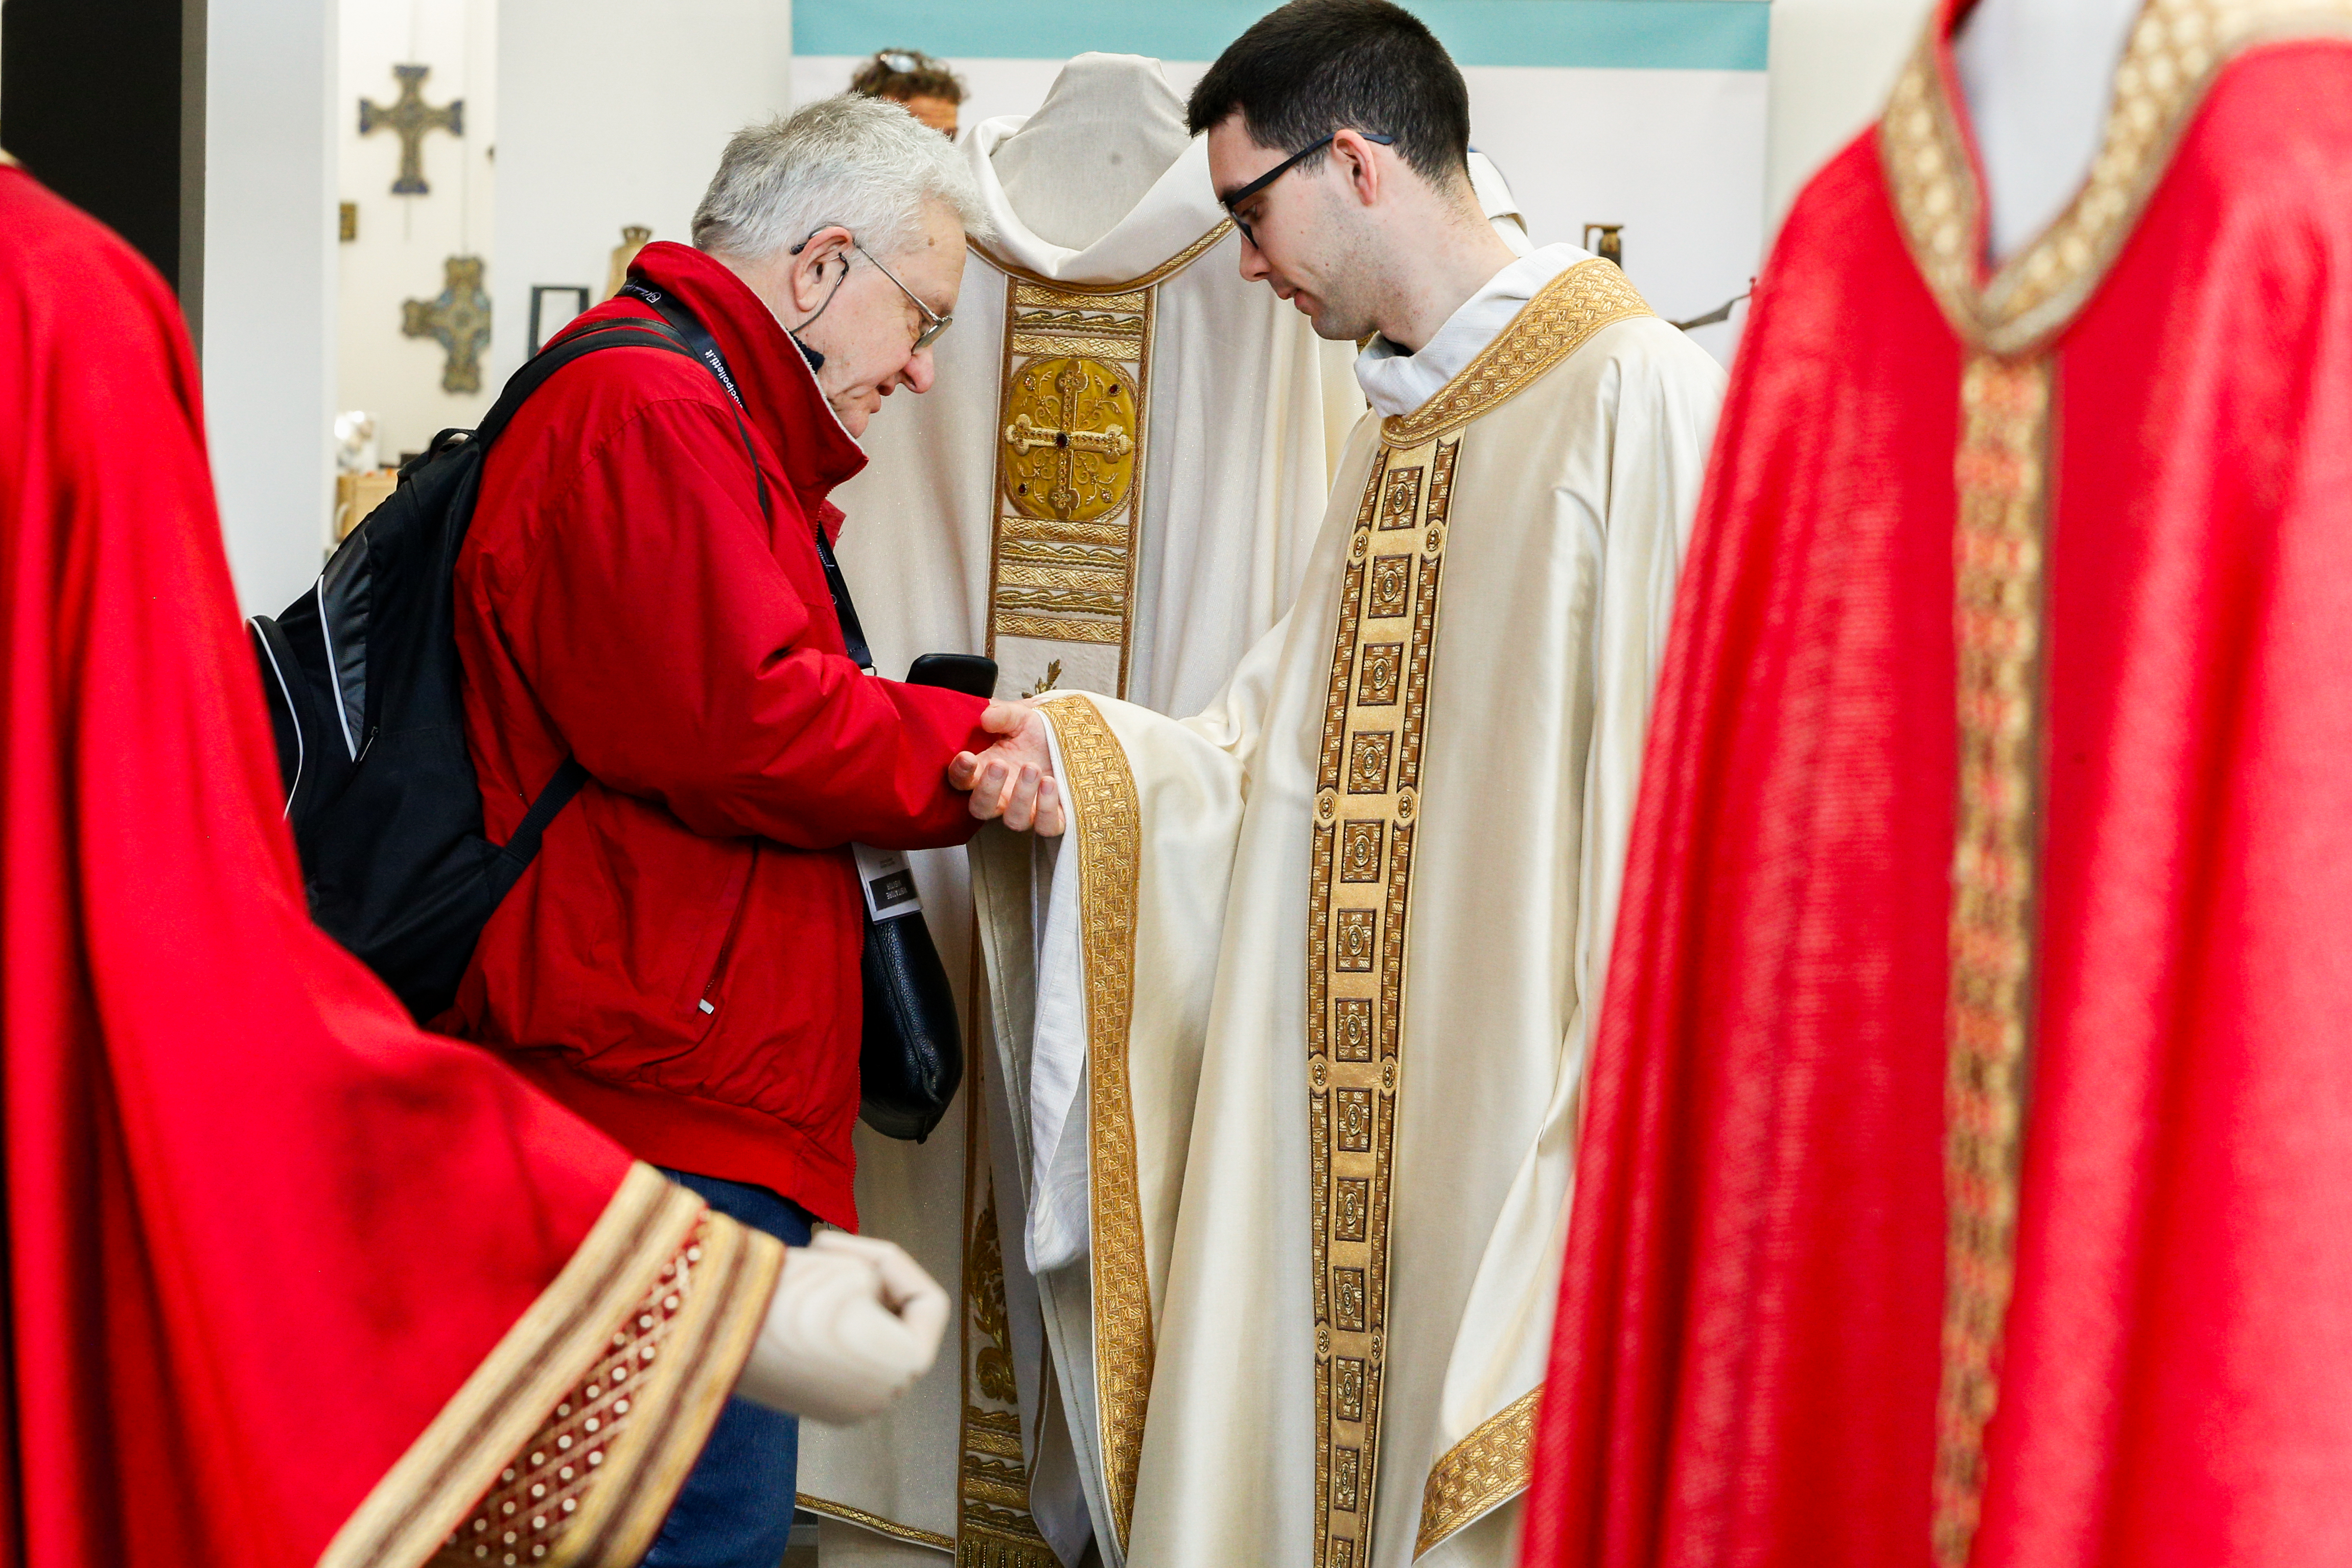 A priest shops for a chasuble.